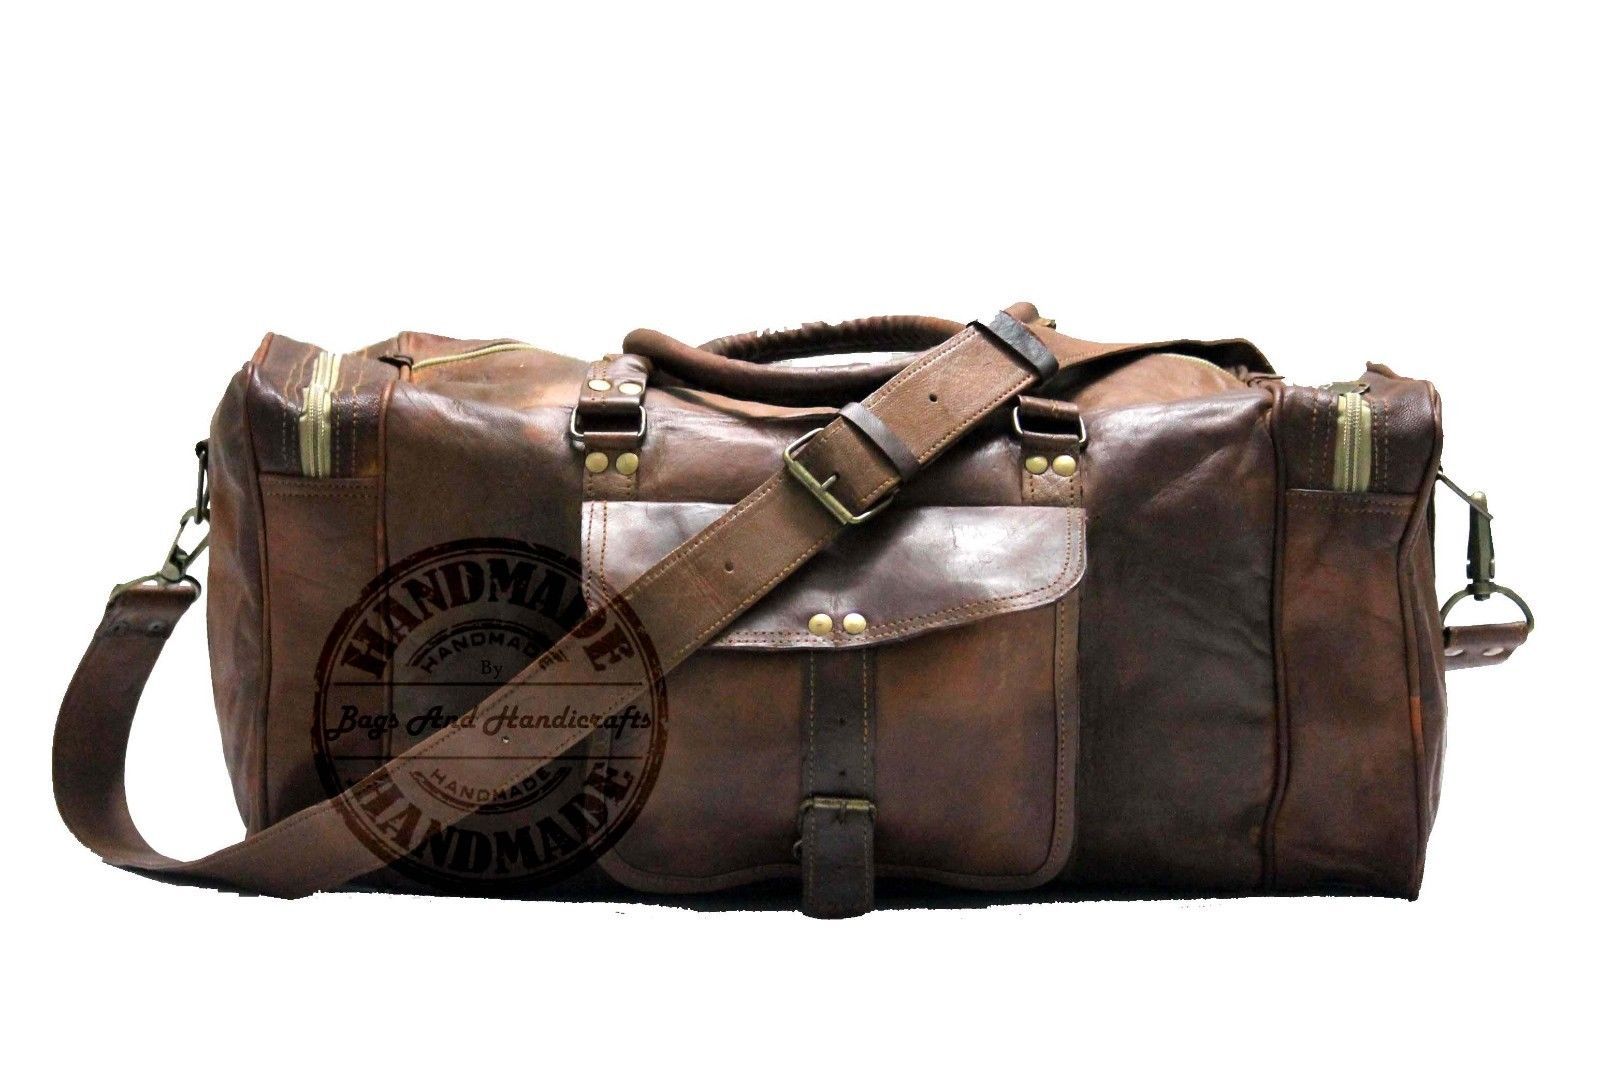 Download Mens Large Genuine Leather Duffle Gym Travel Bags Luggage ...